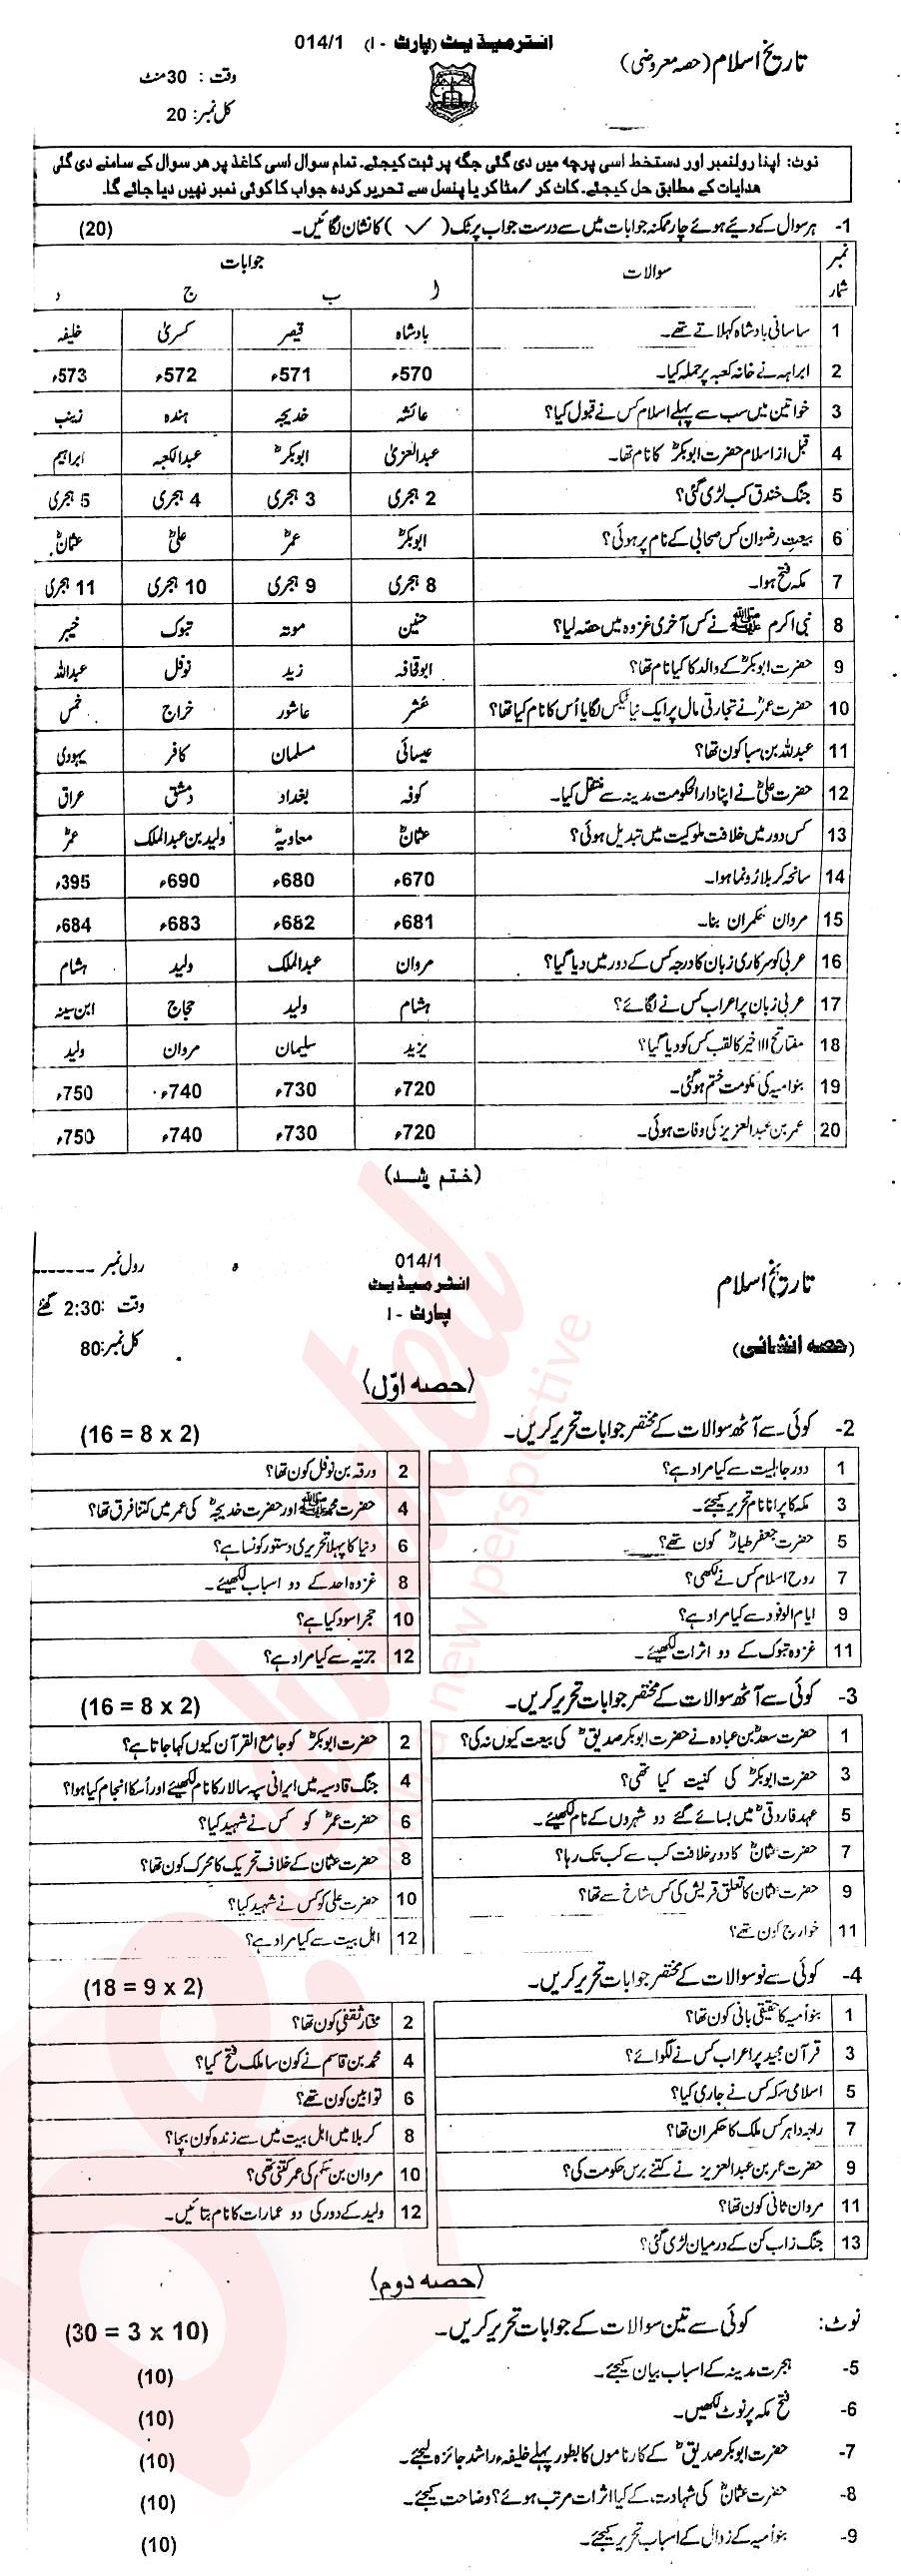 Islamic History ICS Part 1 Past Paper Group 1 BISE AJK 2014